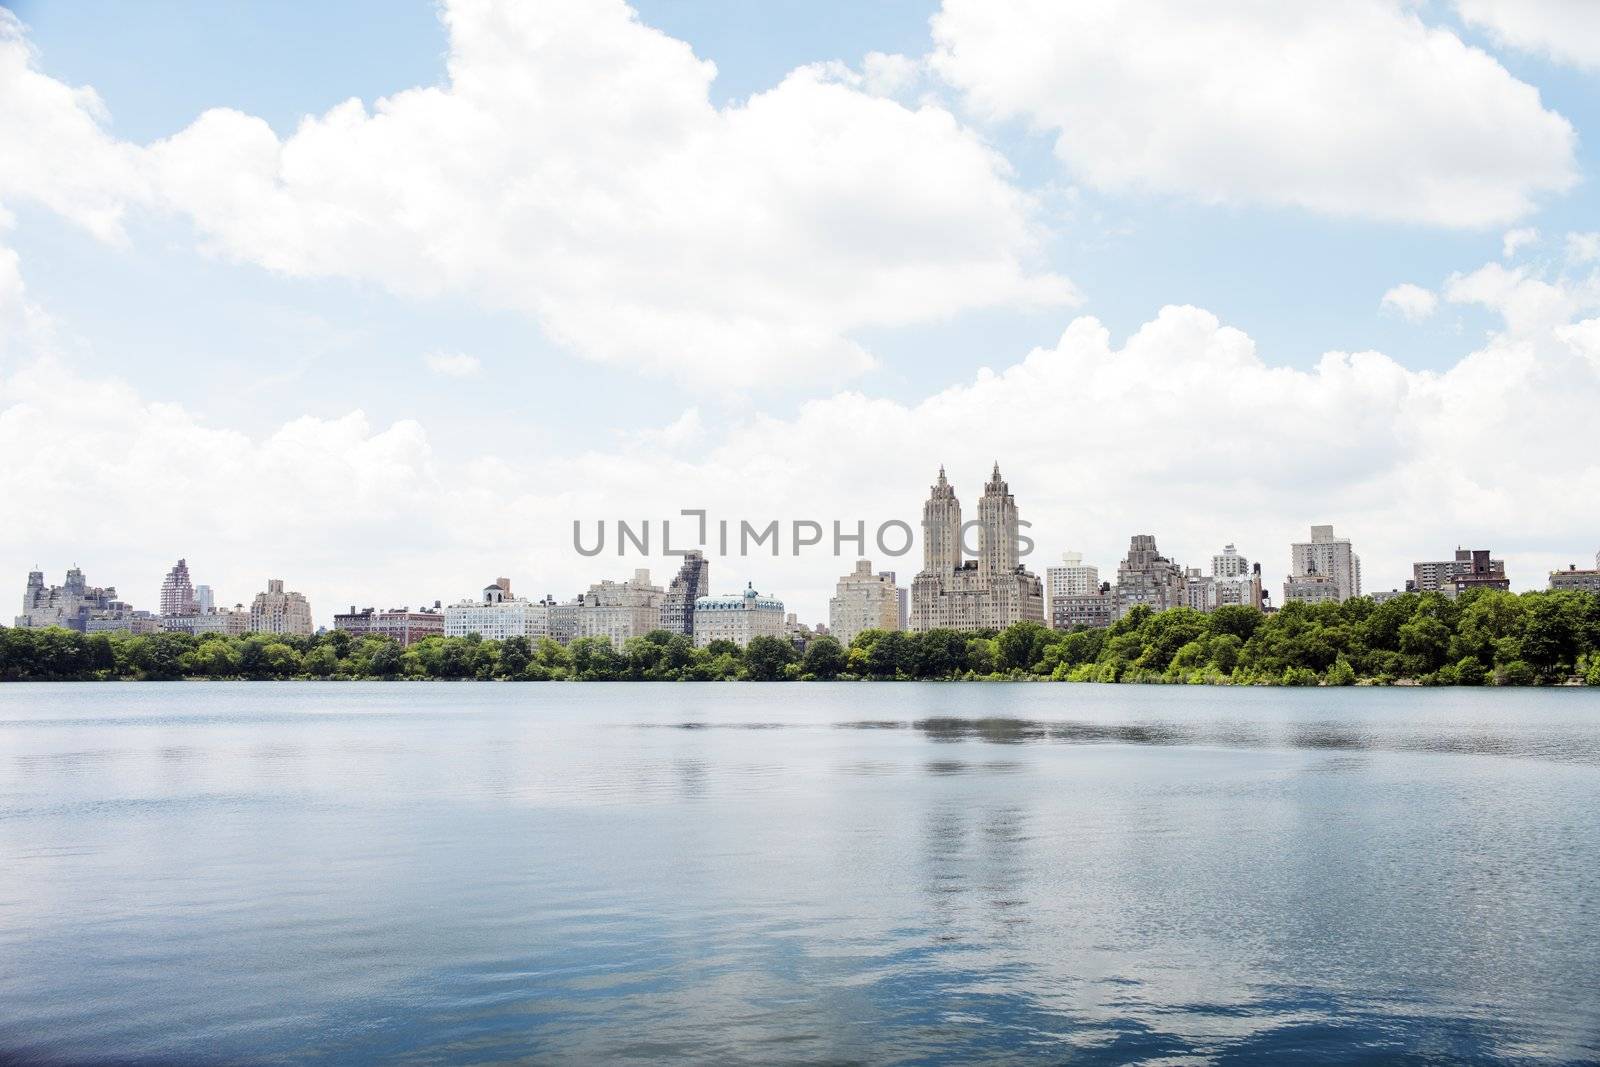 Jacqueline Kennedy Onassis Reservoir by Stocksnapper